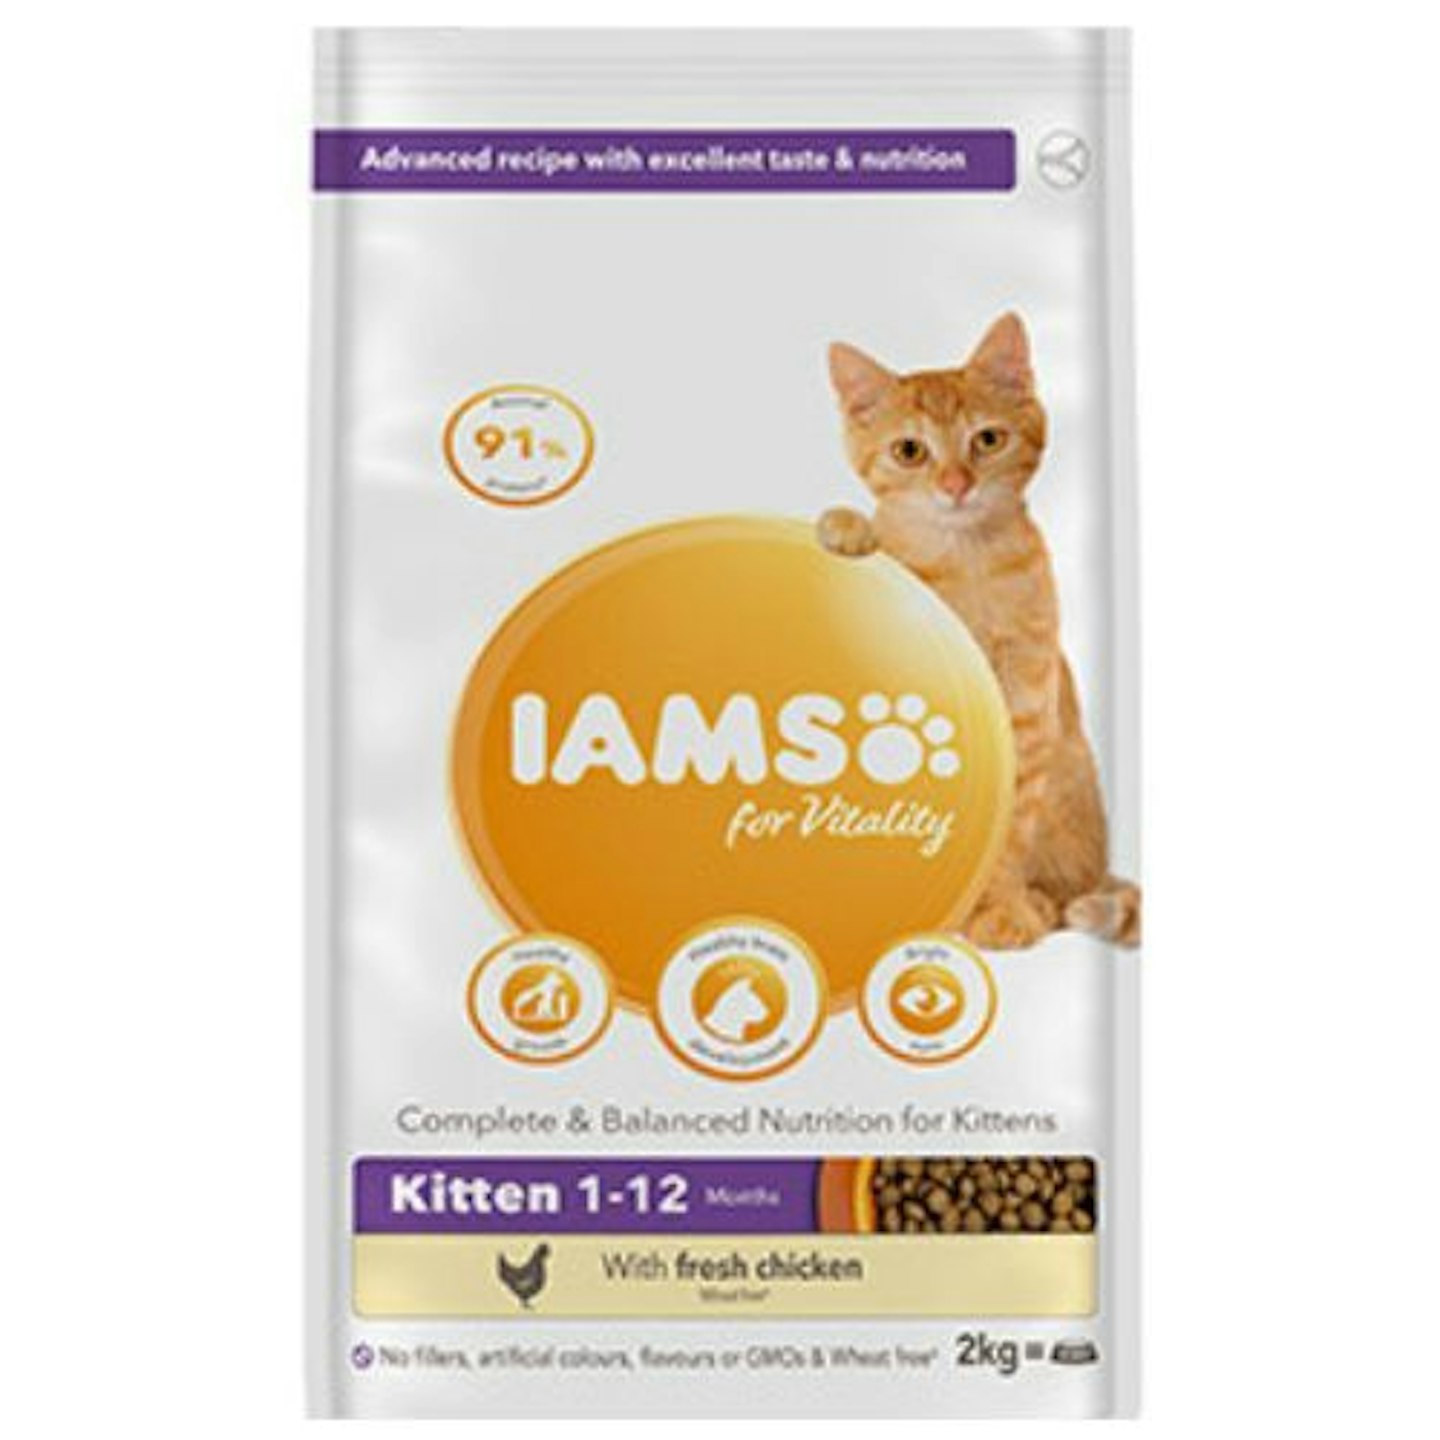 Iams for Vitality Dry Kitten Food with Fresh Chicken